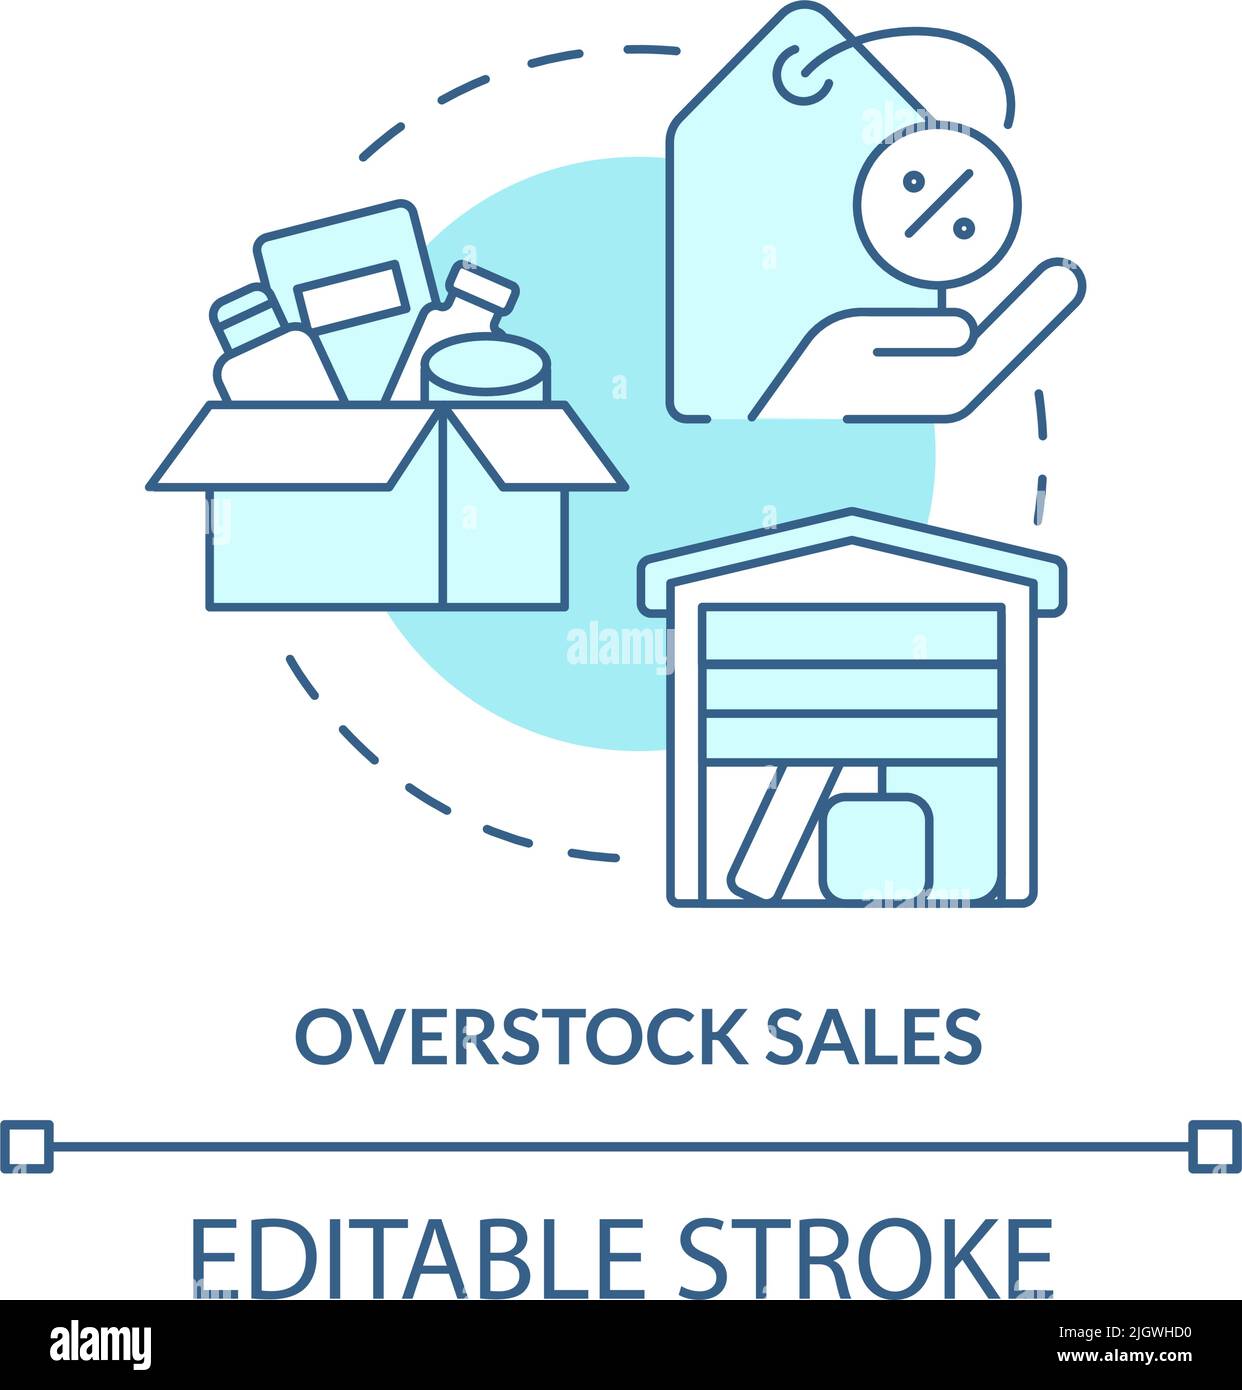 Overstock sales turquoise concept icon Stock Vector